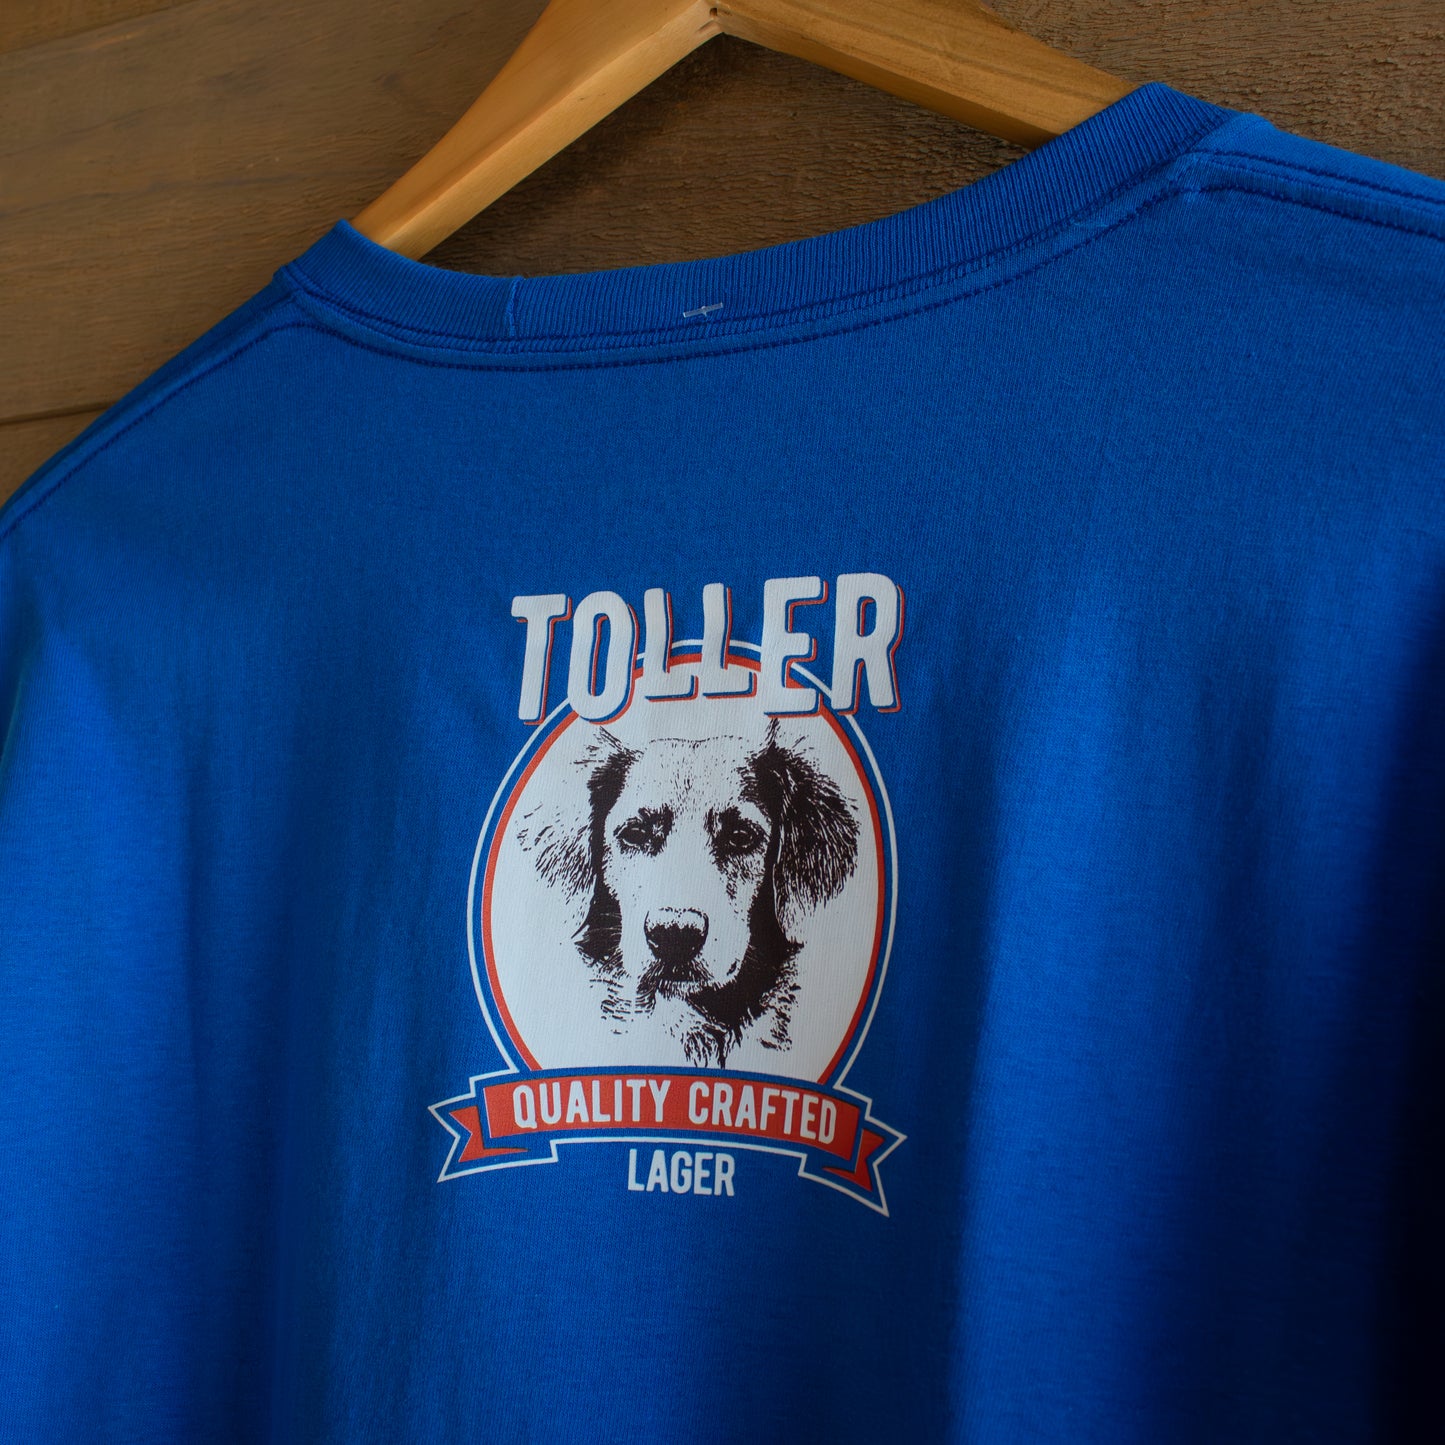 Classic Toller Long Sleeve